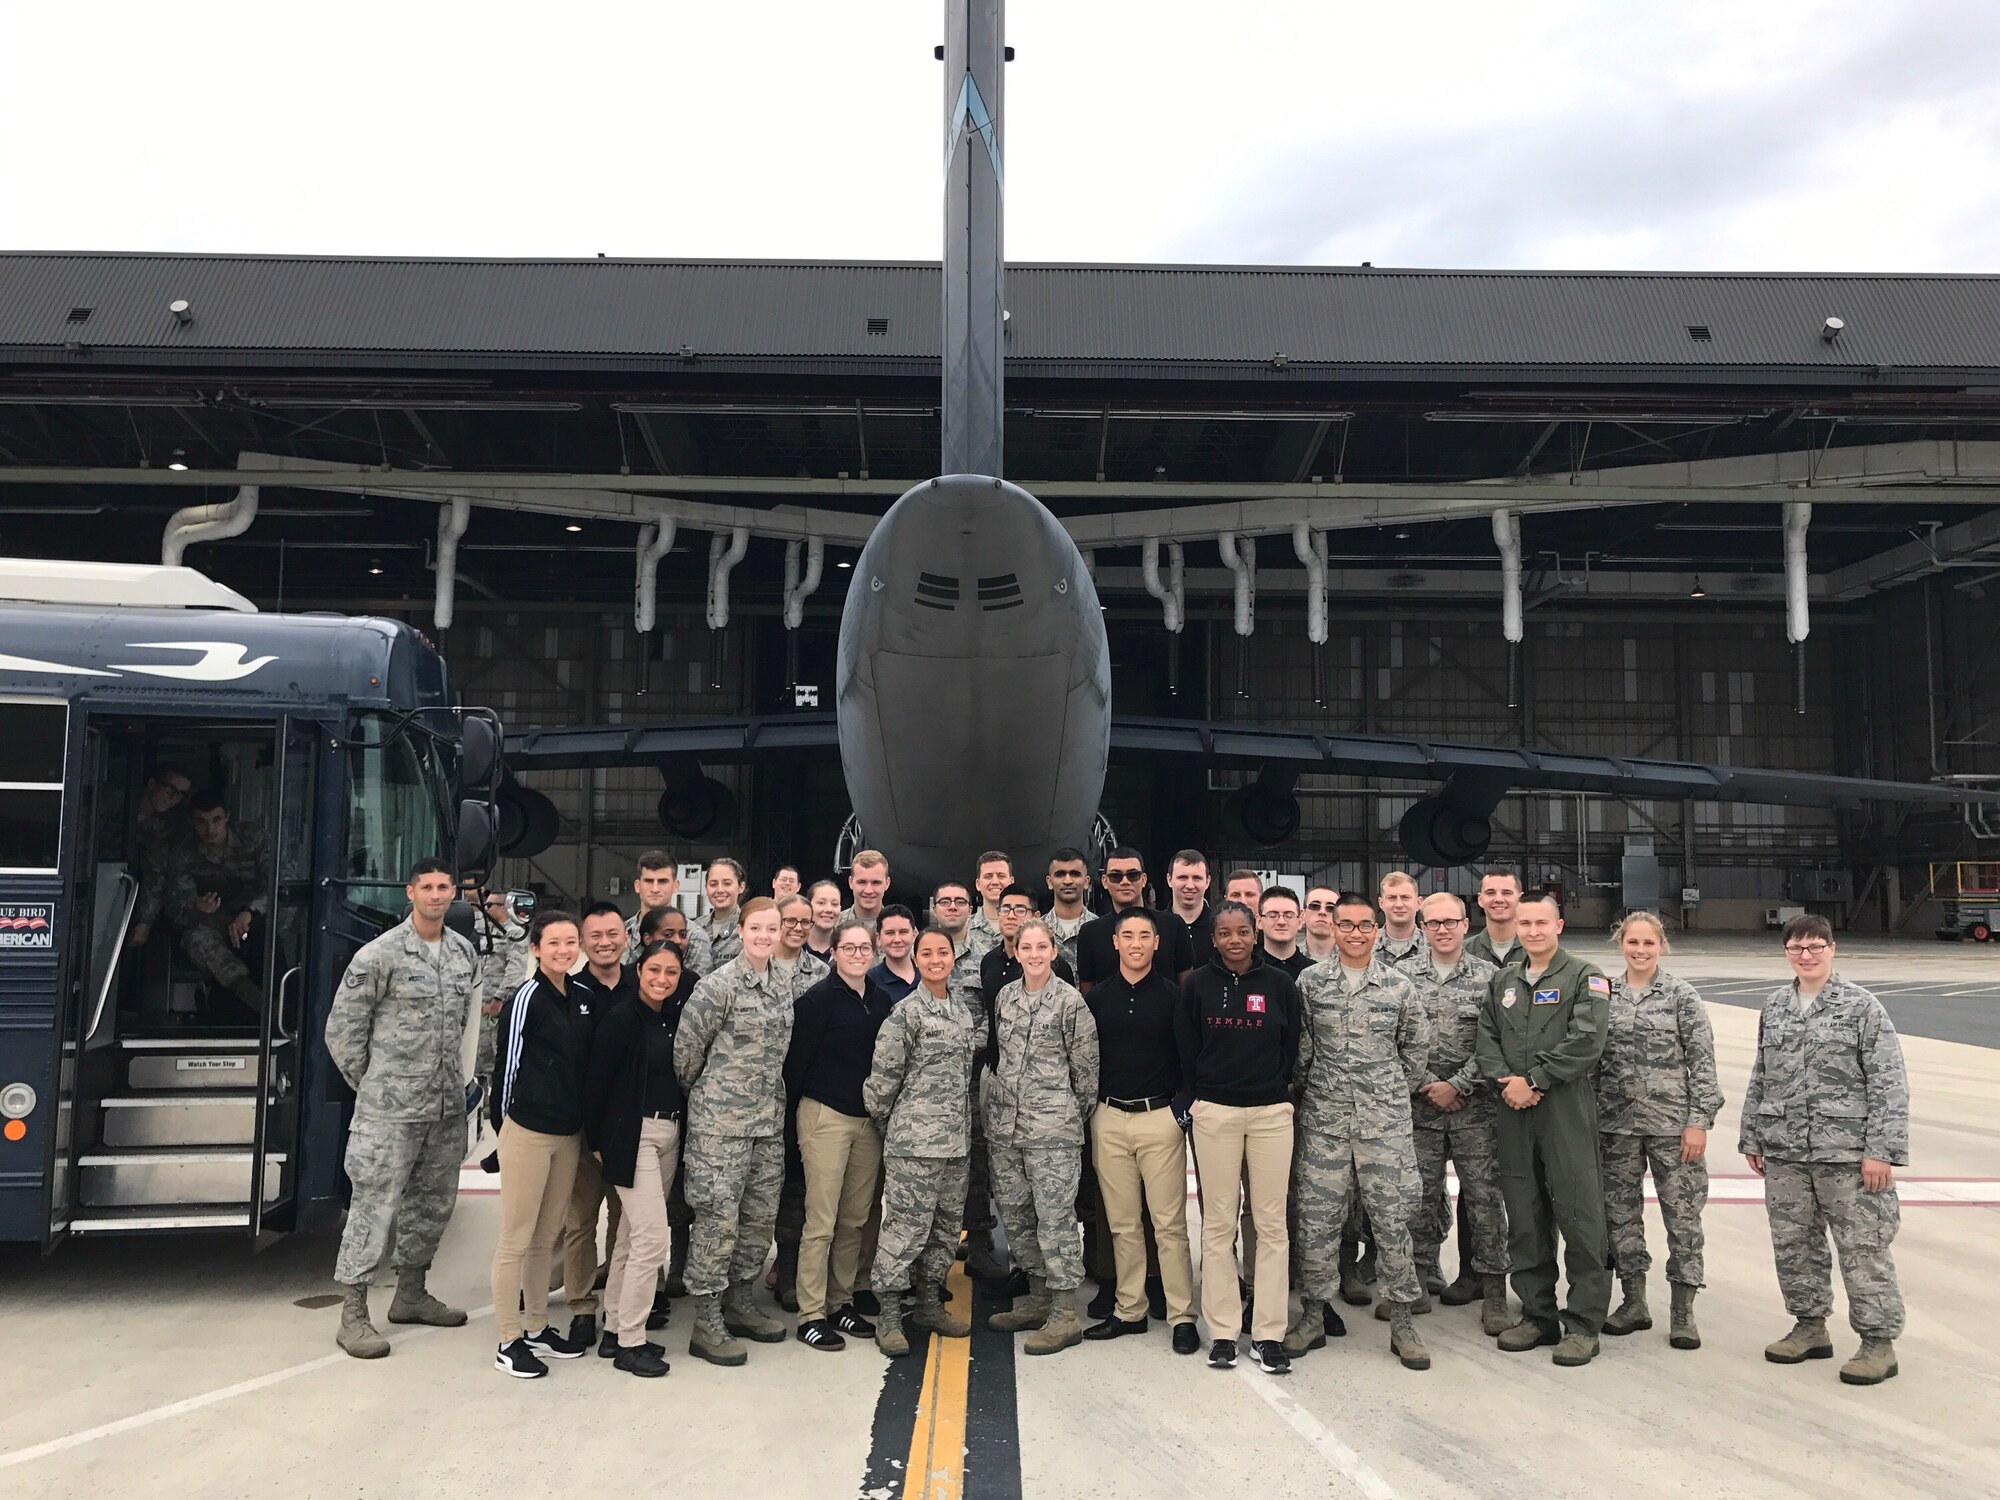 A group of ROTC and Junior ROTC cadets from local schools pose for a group photo in front of a C-5M Super Galaxy Oct. 11, 2017, during a Pathways to Blue tour at Dover Air Force Base, Del. The cadets toured several squadrons and spoke with more than a dozen officers during the tour to get a behind-the-scenes view of military service. (Courtesy photo)